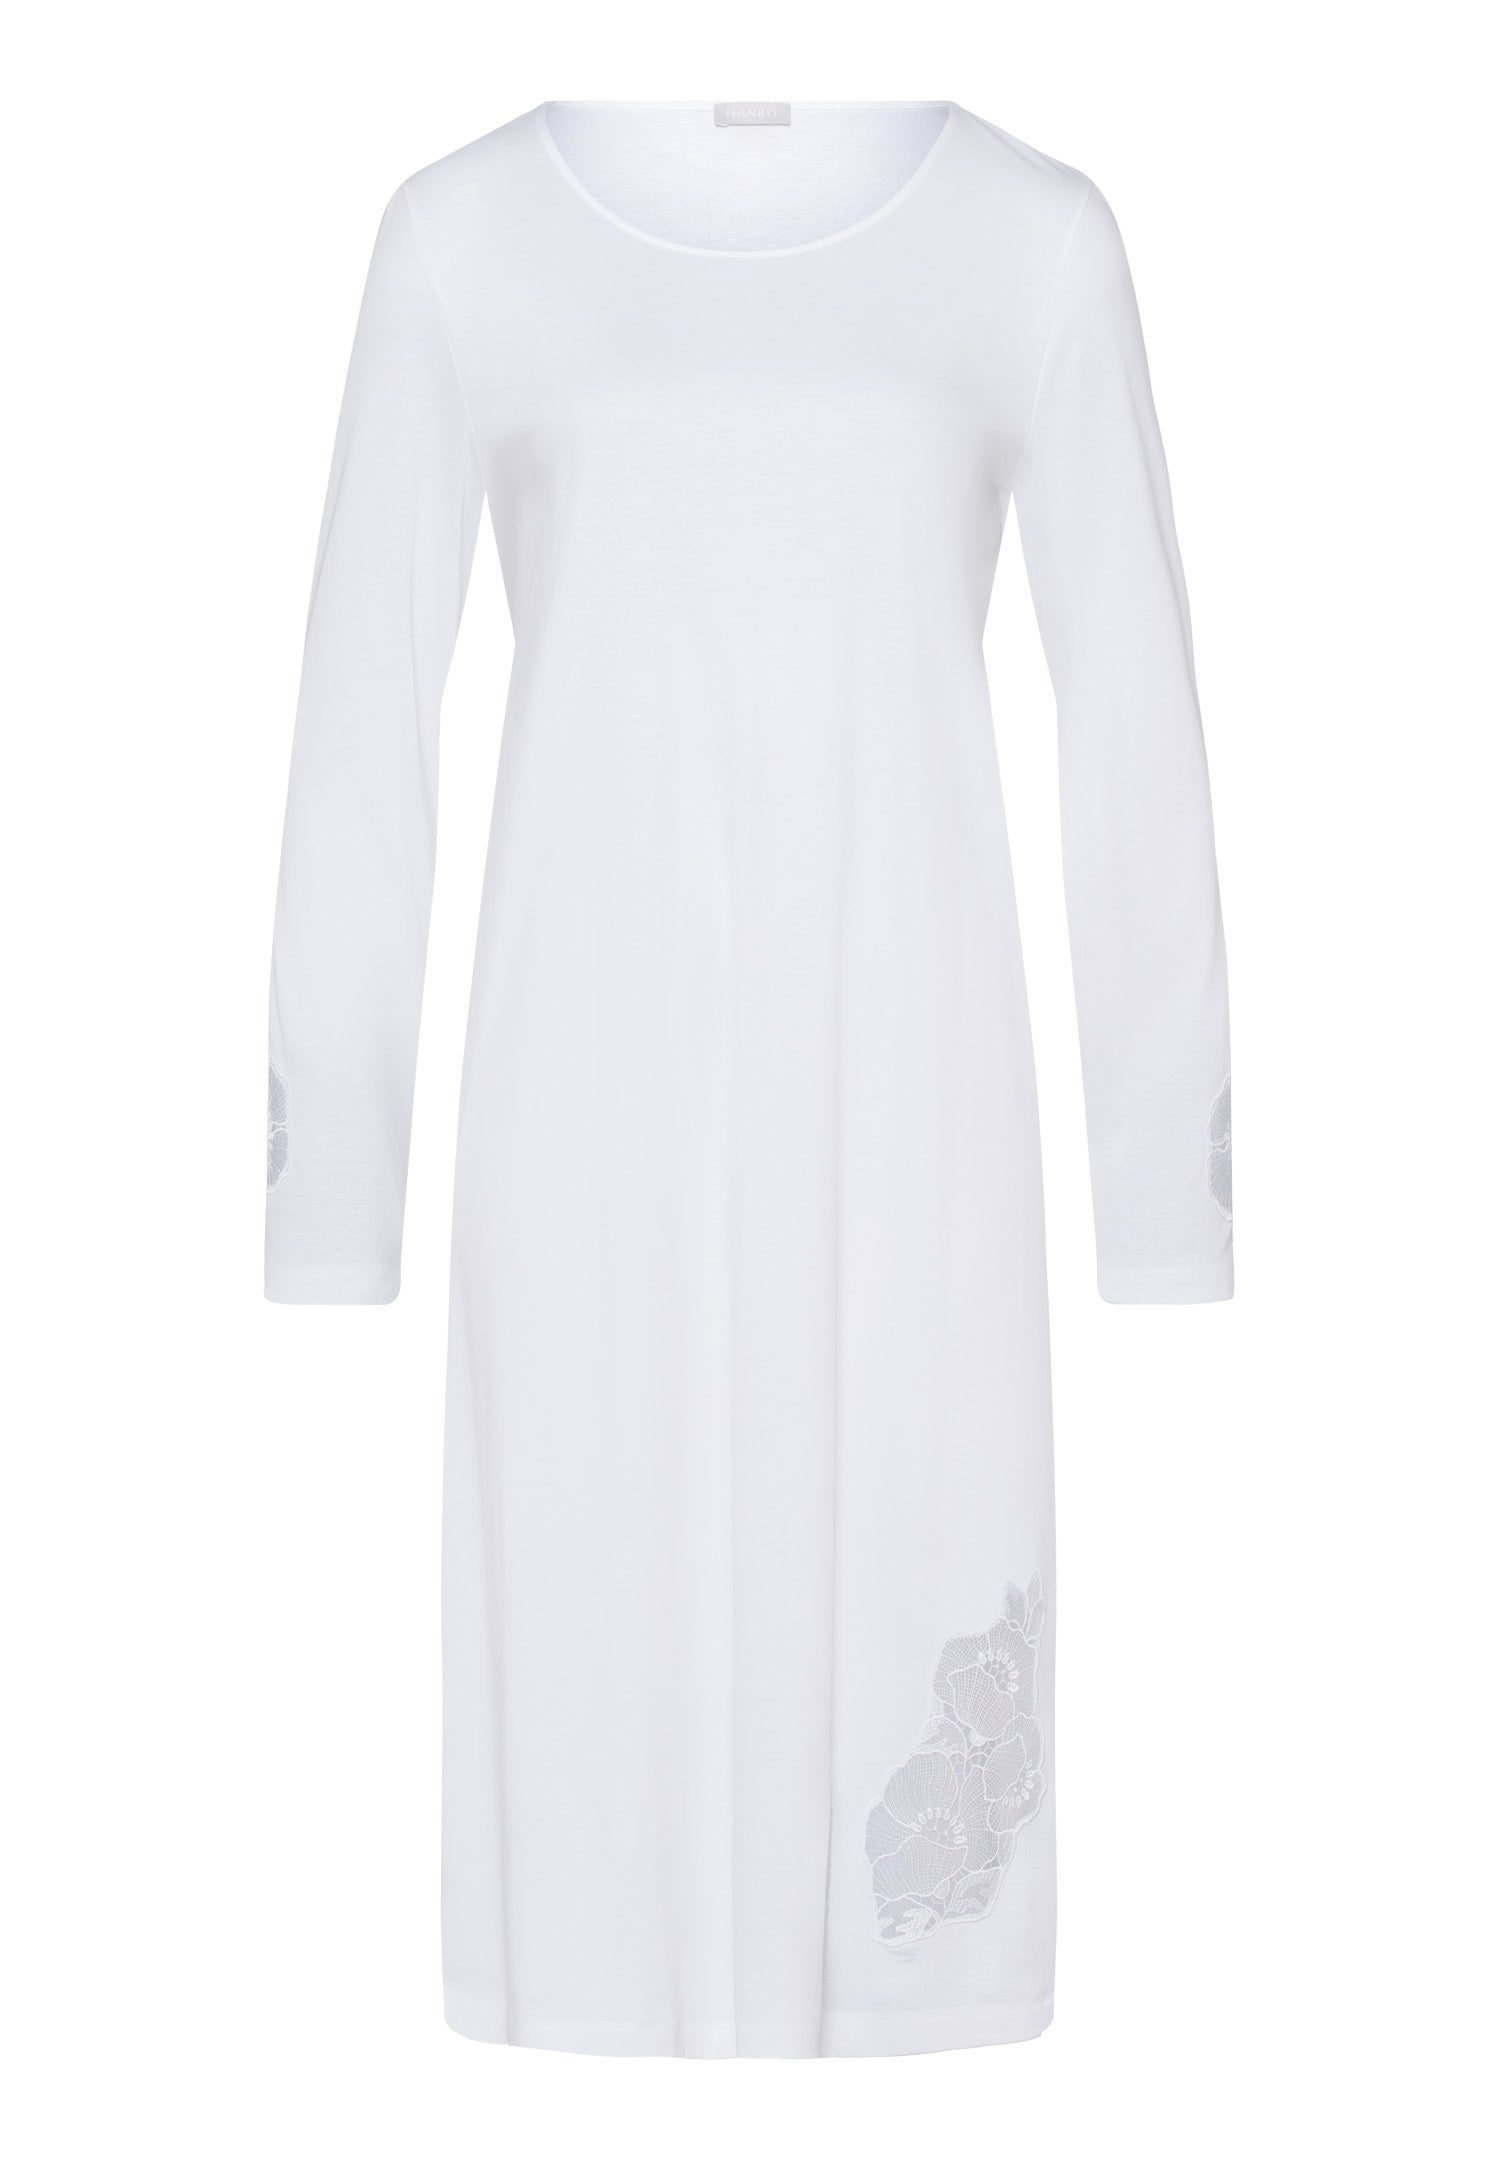 76054 Paola Long Sleeve Nightgown - 101 White